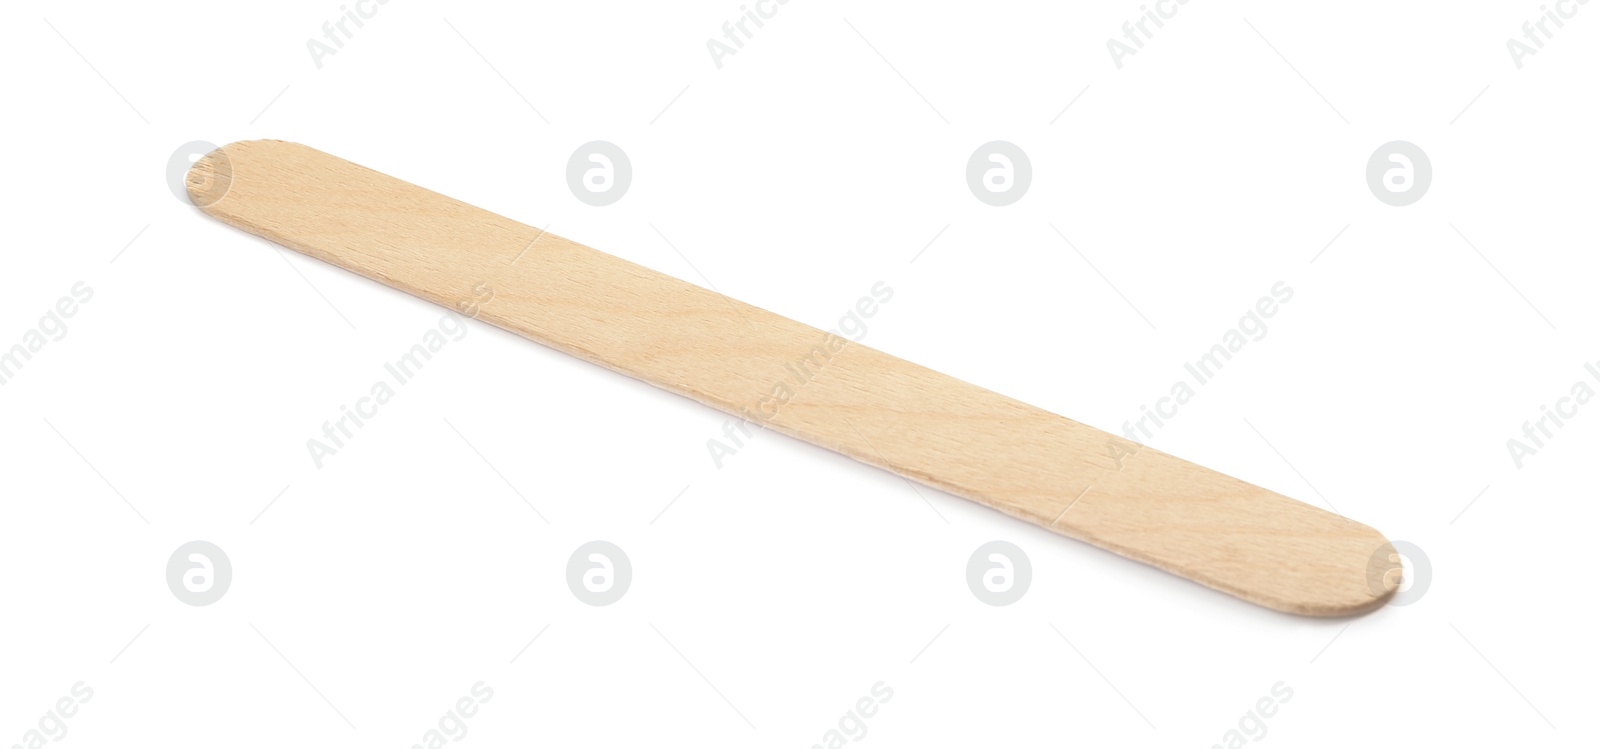 Photo of Disposable wooden spatula for depilatory wax isolated on white